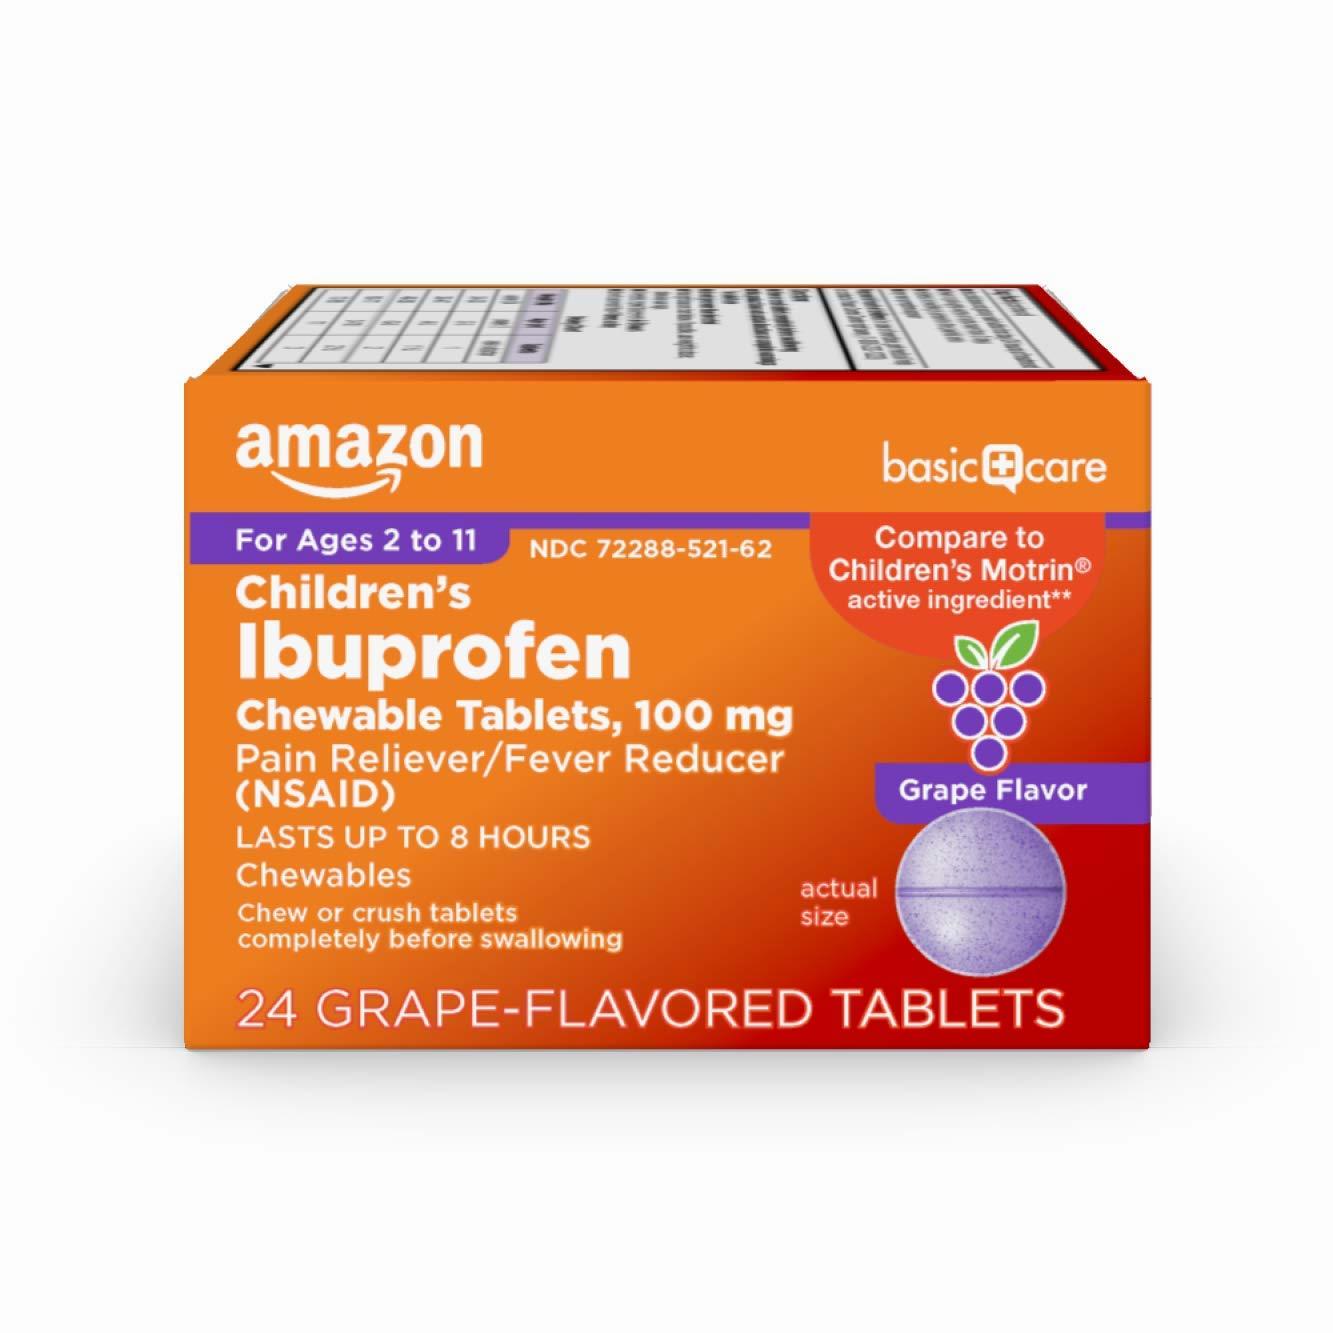 A purple box of grape-flavored chewable ibuprofen tablets for children ages 2 to 11.